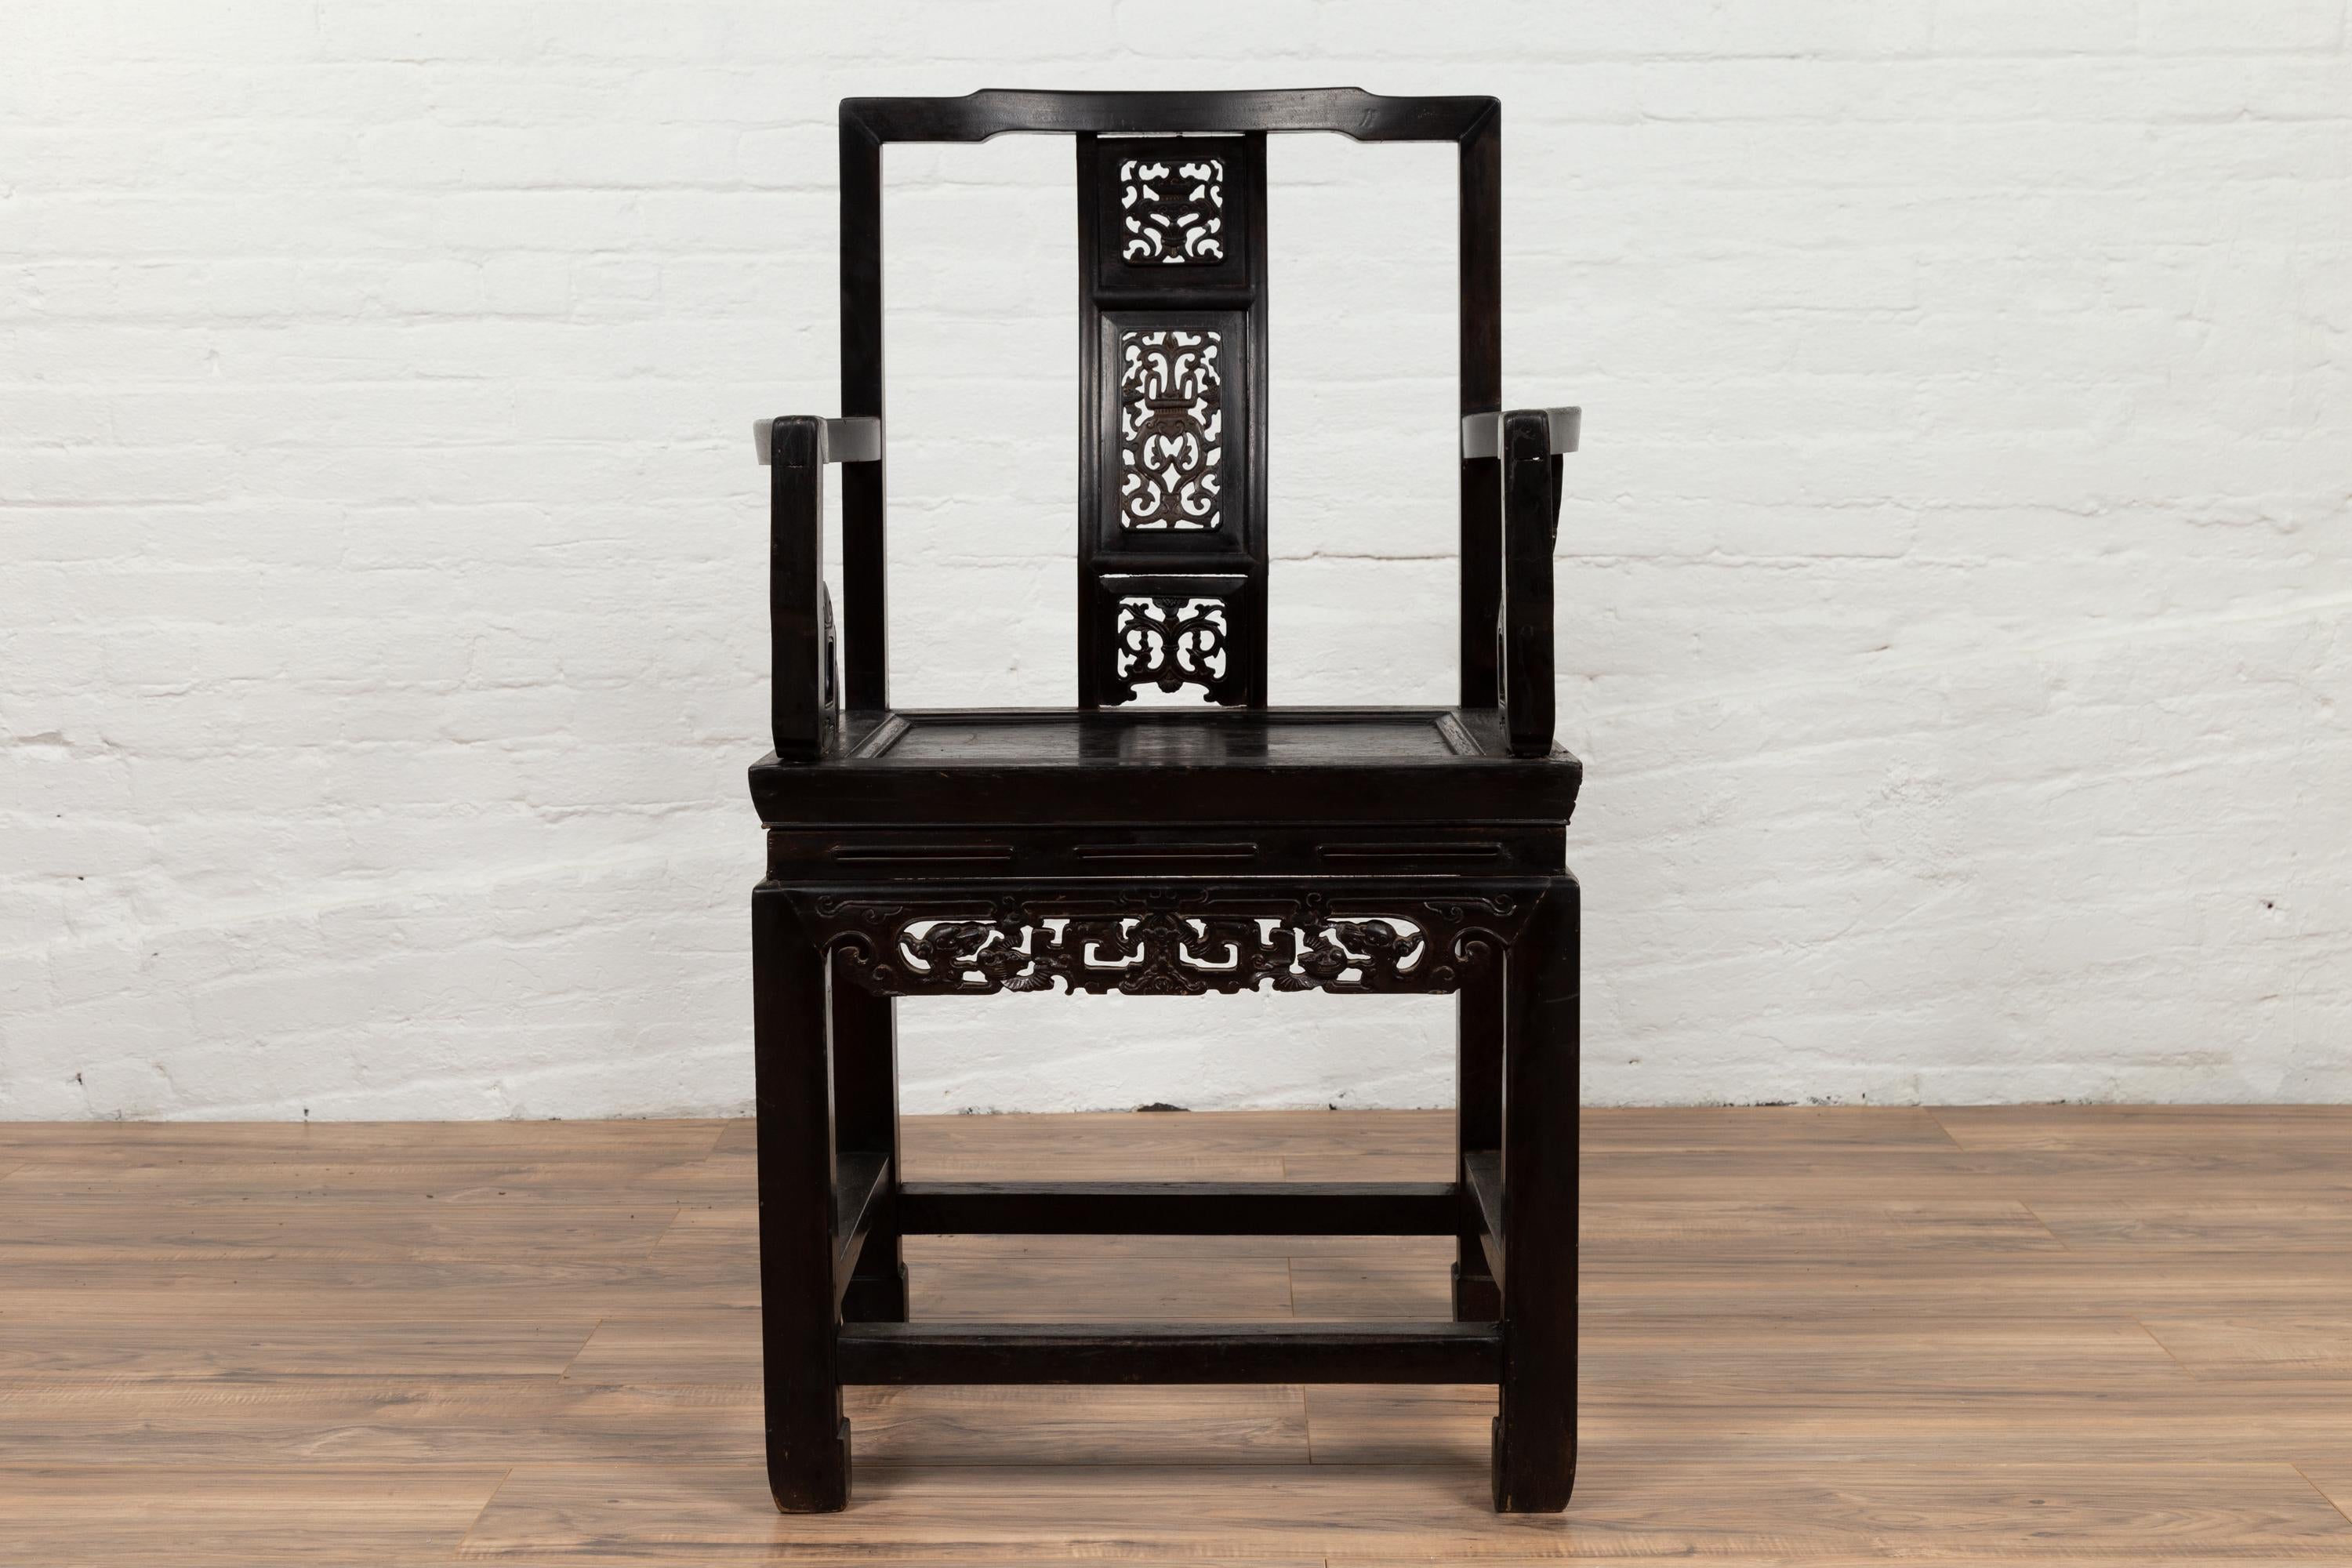 A Chinese antique wedding chair from the early 20th century, with black patina and carved motifs. Born in China during the early years of the 20th century, this exquisite wedding chair features an open straight back, adorned with a sinuous central